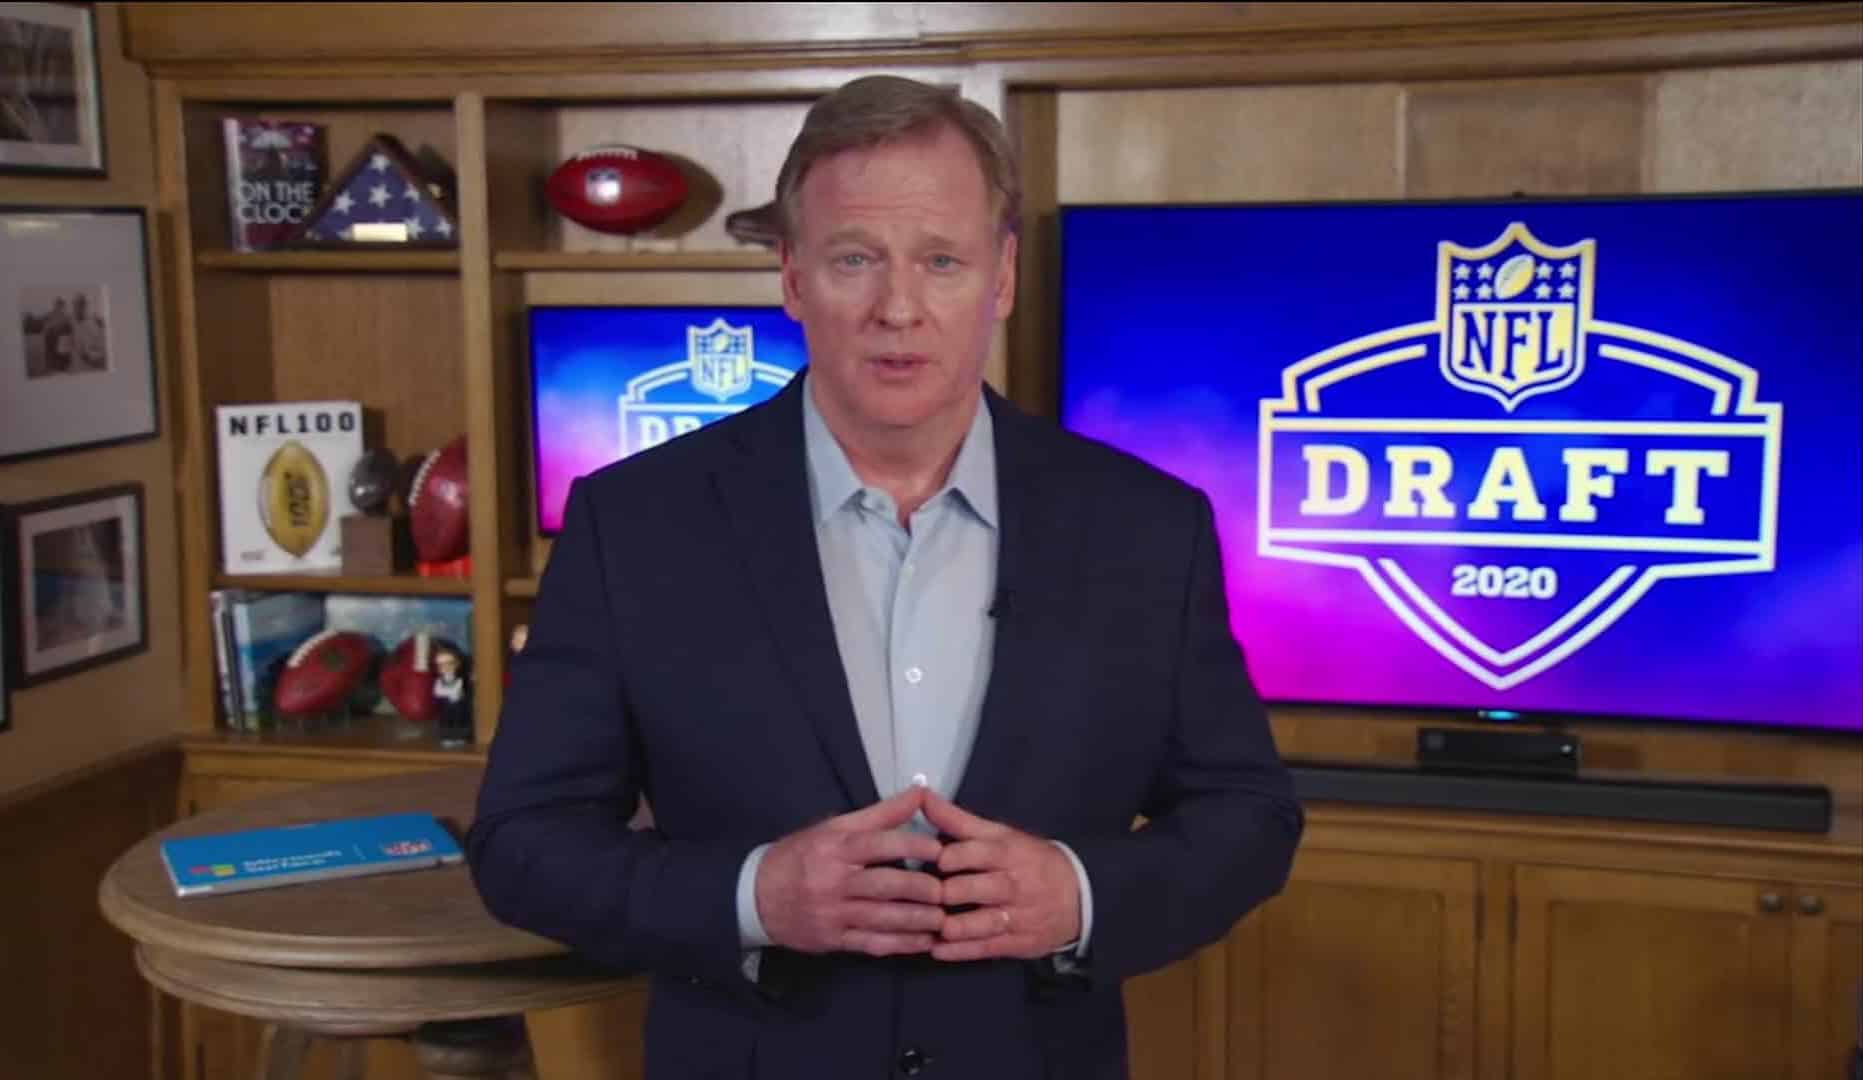 UNSPECIFIED LOCATION - APRIL 23: (EDITORIAL USE ONLY) In this still image from video provided by the NFL, NFL Commissioner Roger Goodell speaks from his home in Bronxville, New York during the first round of the 2020 NFL Draft on April 23, 2020.